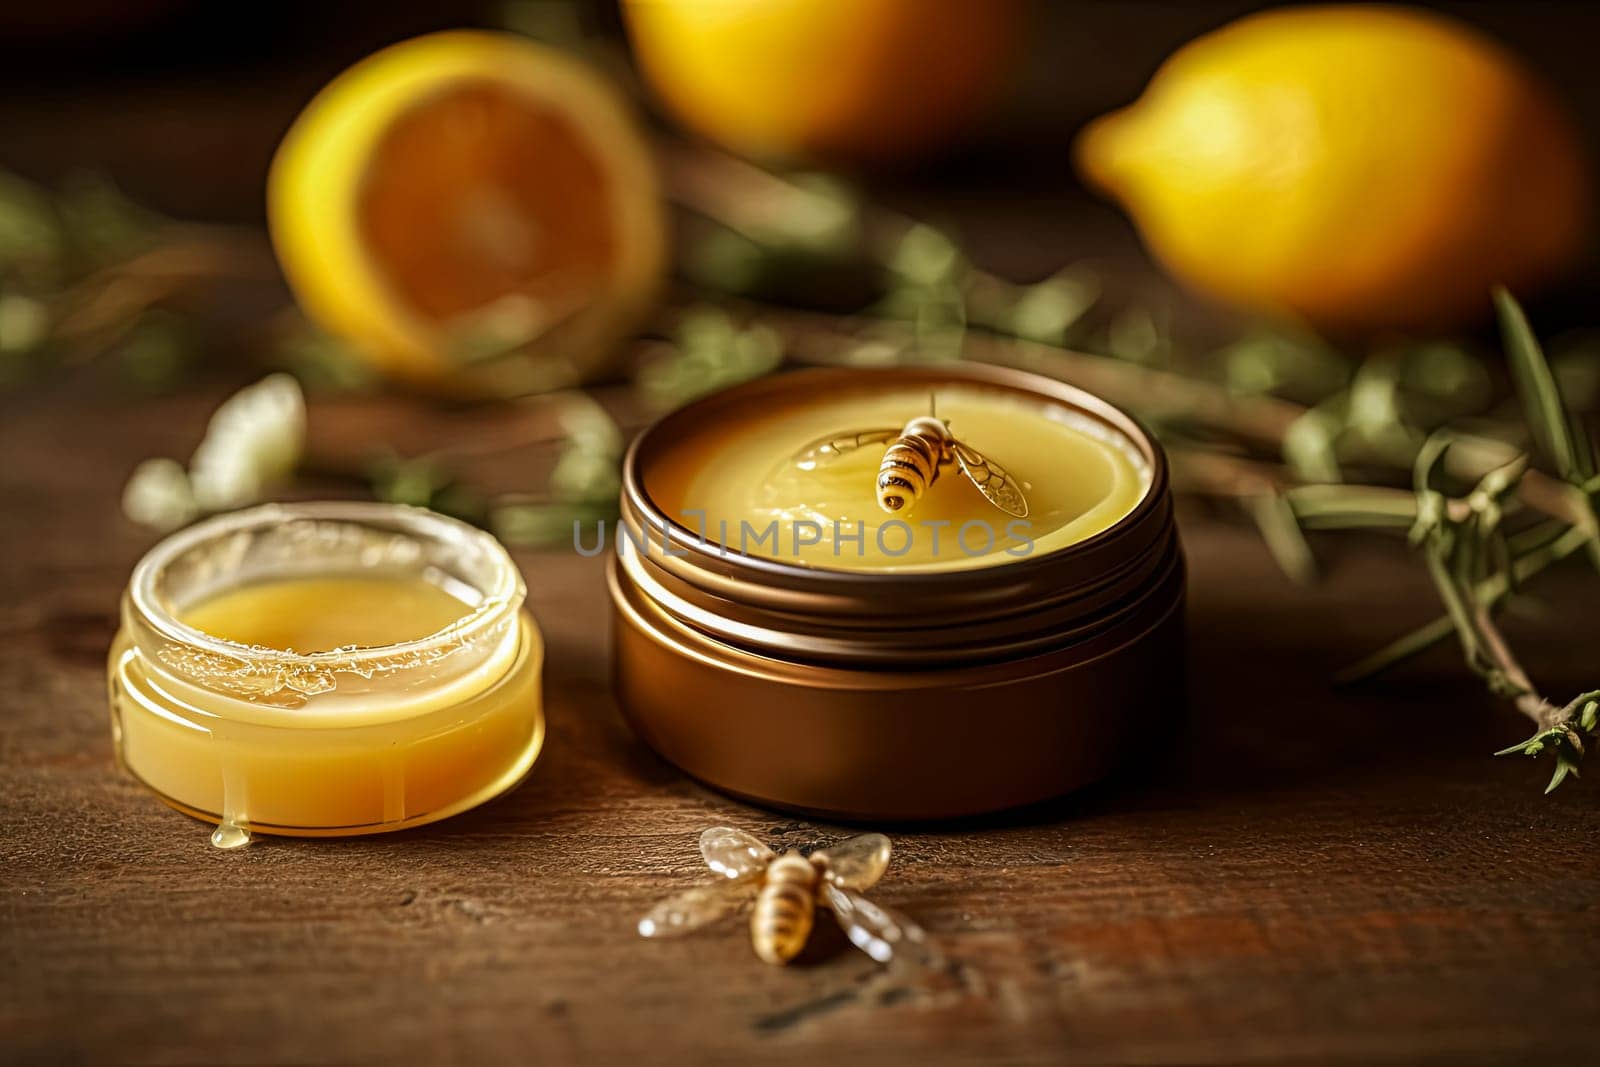 A metal jar of beeswax for the face sits on the table, providing hydration and skincare for both face and body.